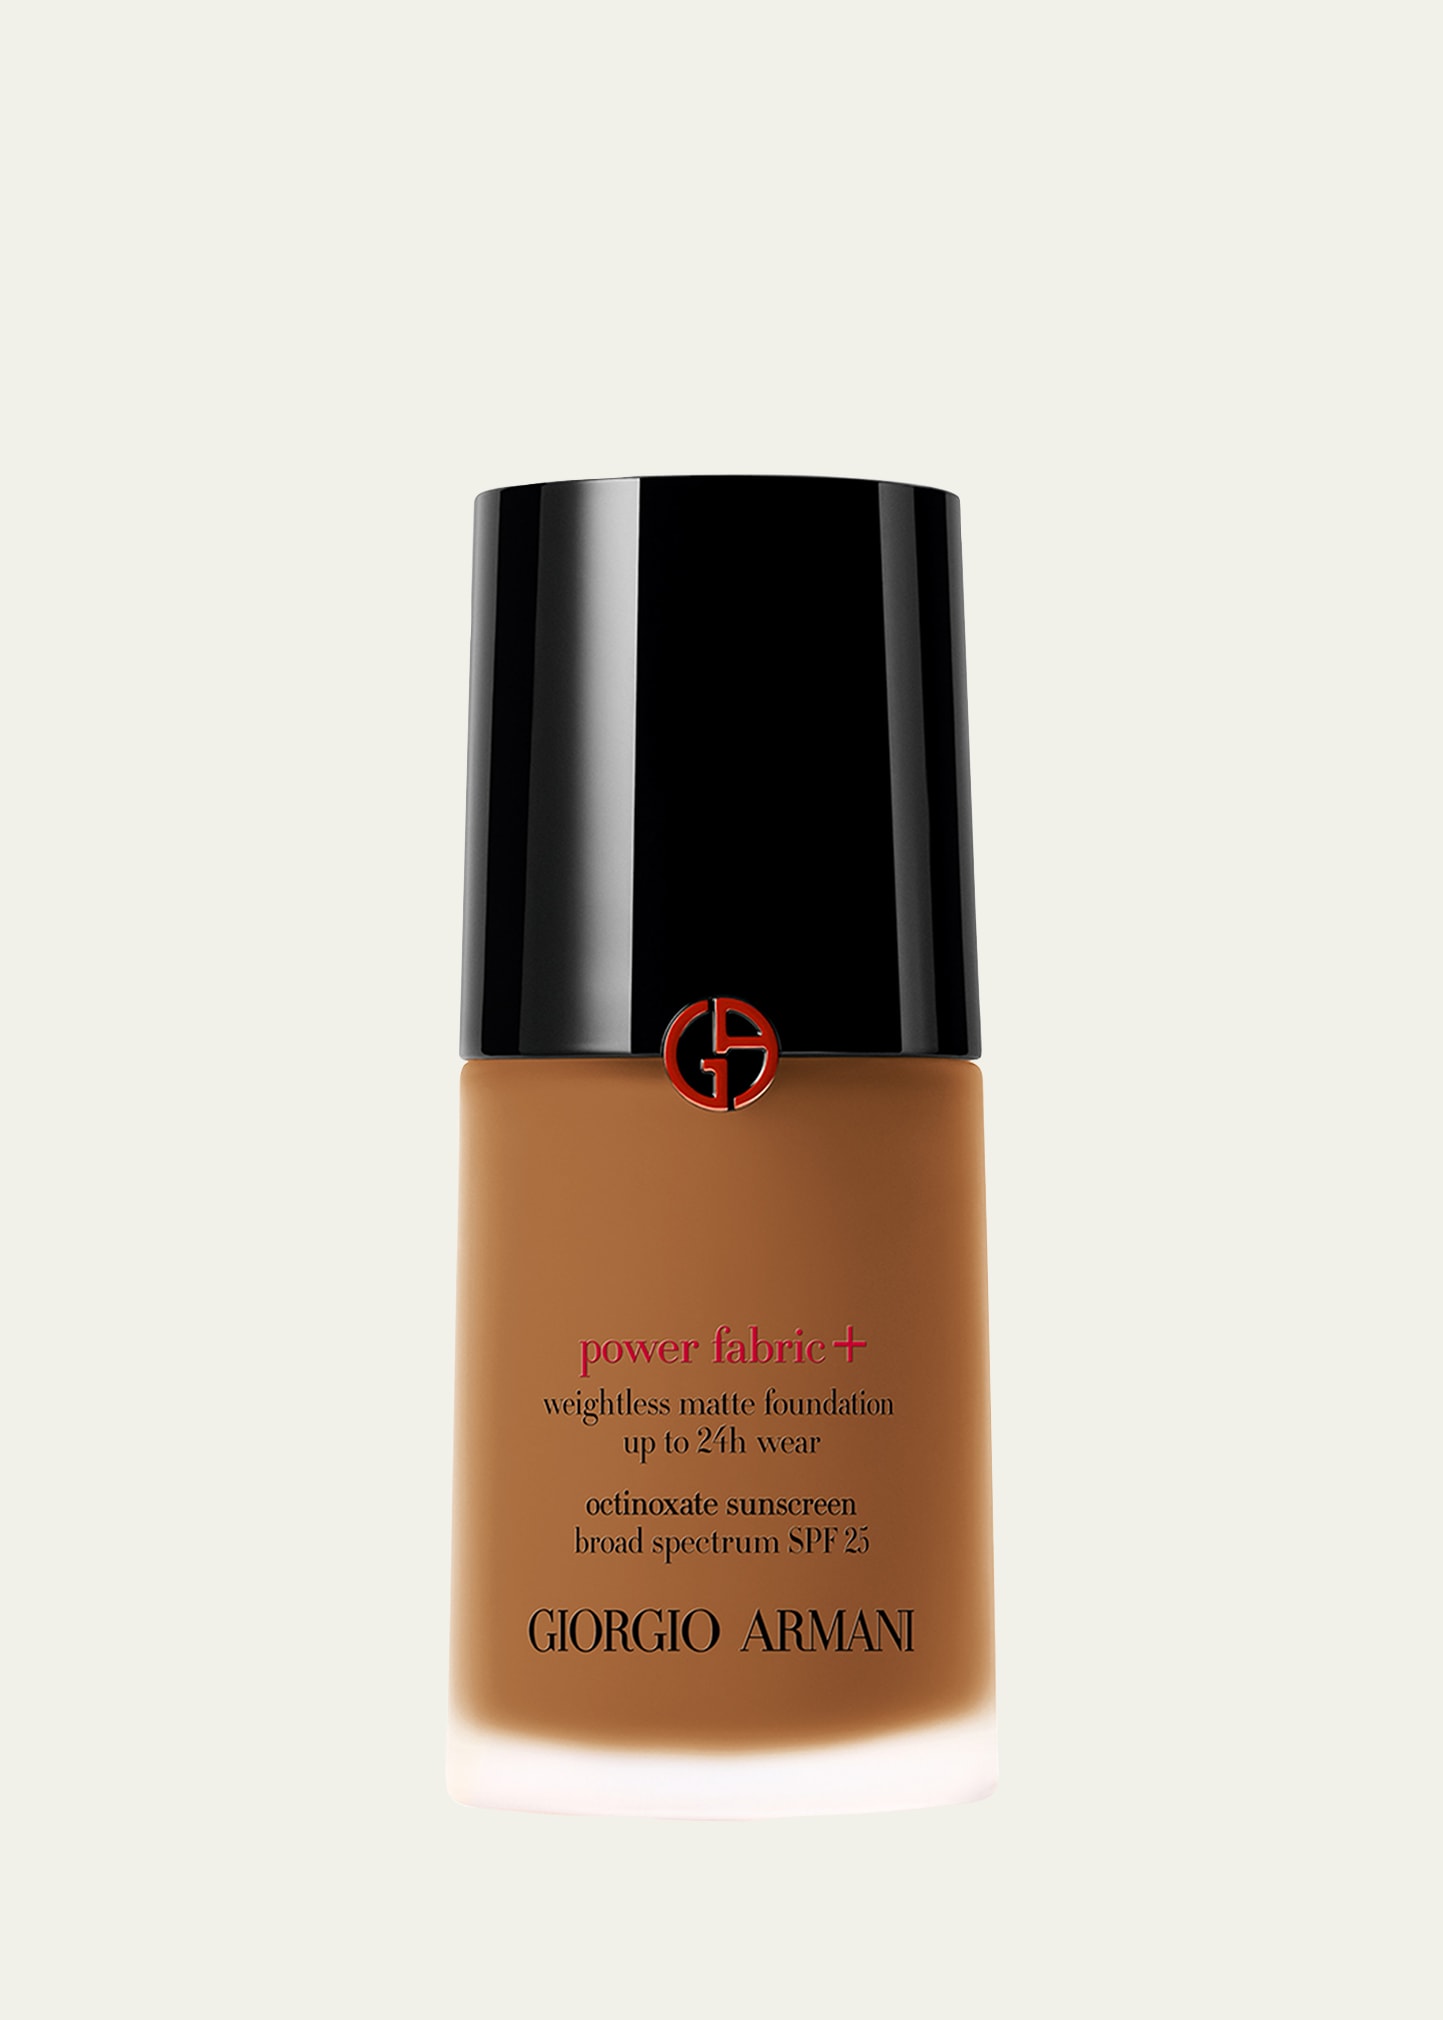 Armani Beauty Power Fabric+ Matte Foundation With Broad-spectrum Spf 25 In 10